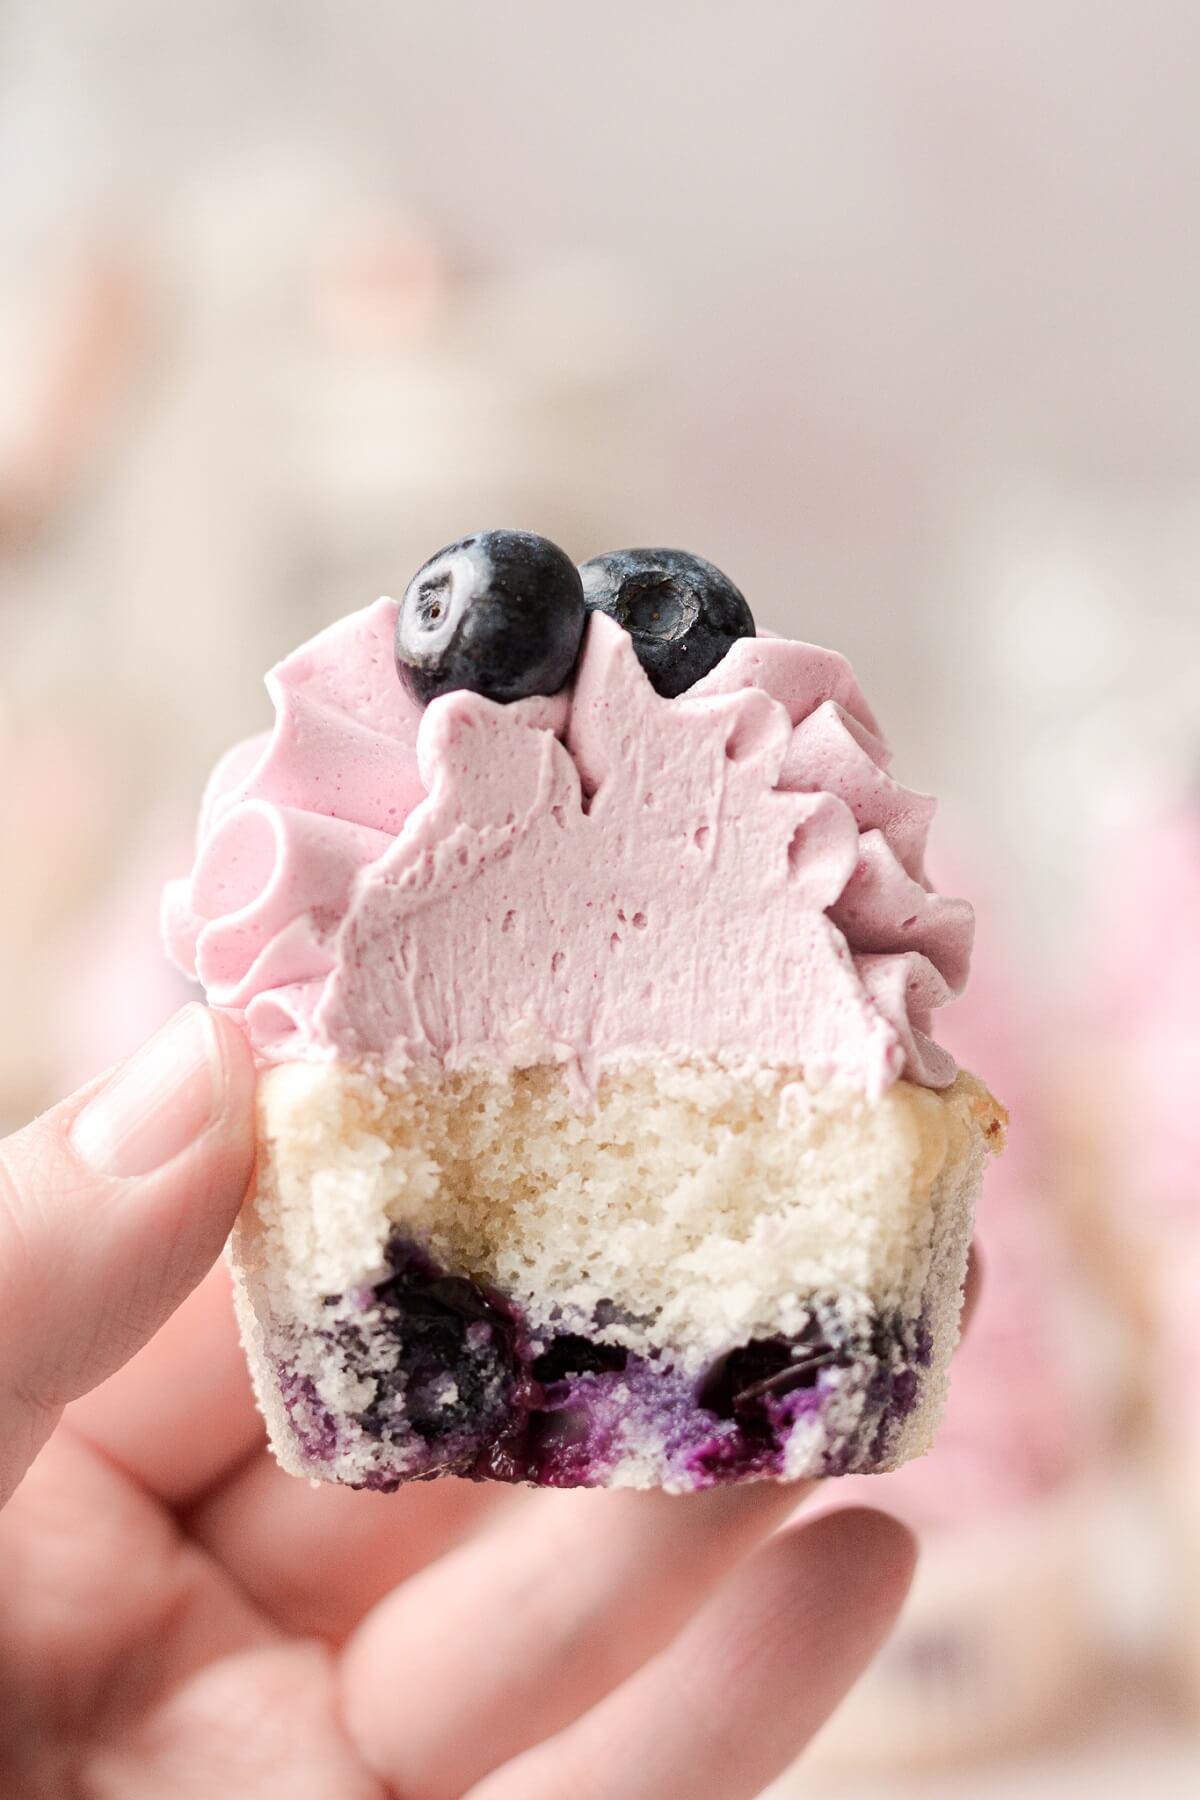 Blueberry cupcake with a bite taken.